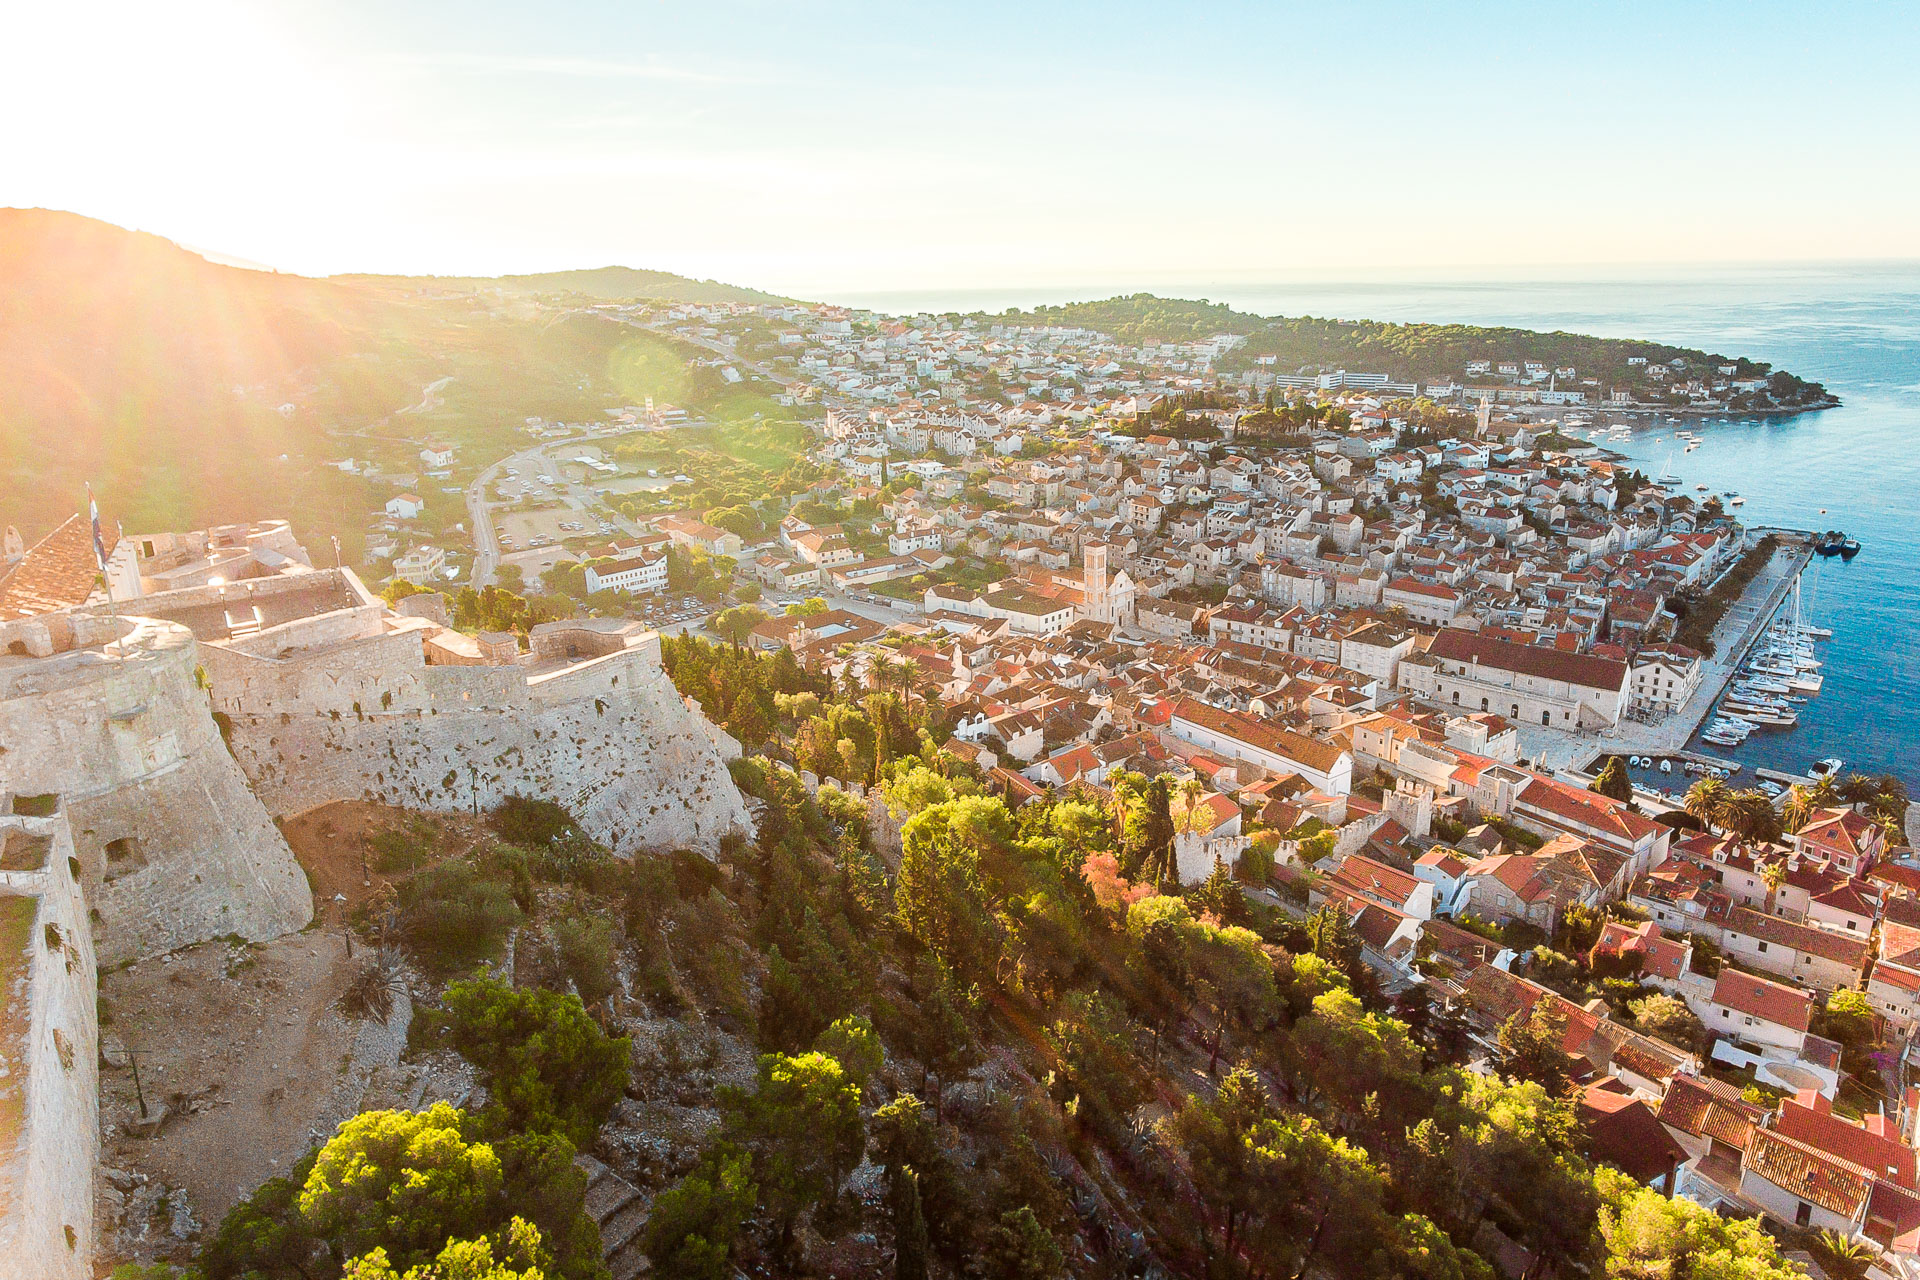 This is a panoramic shot of Hvar in Croatia. In the foreground, there's a castle that overlooks the red rooftops of the seaside town below. 